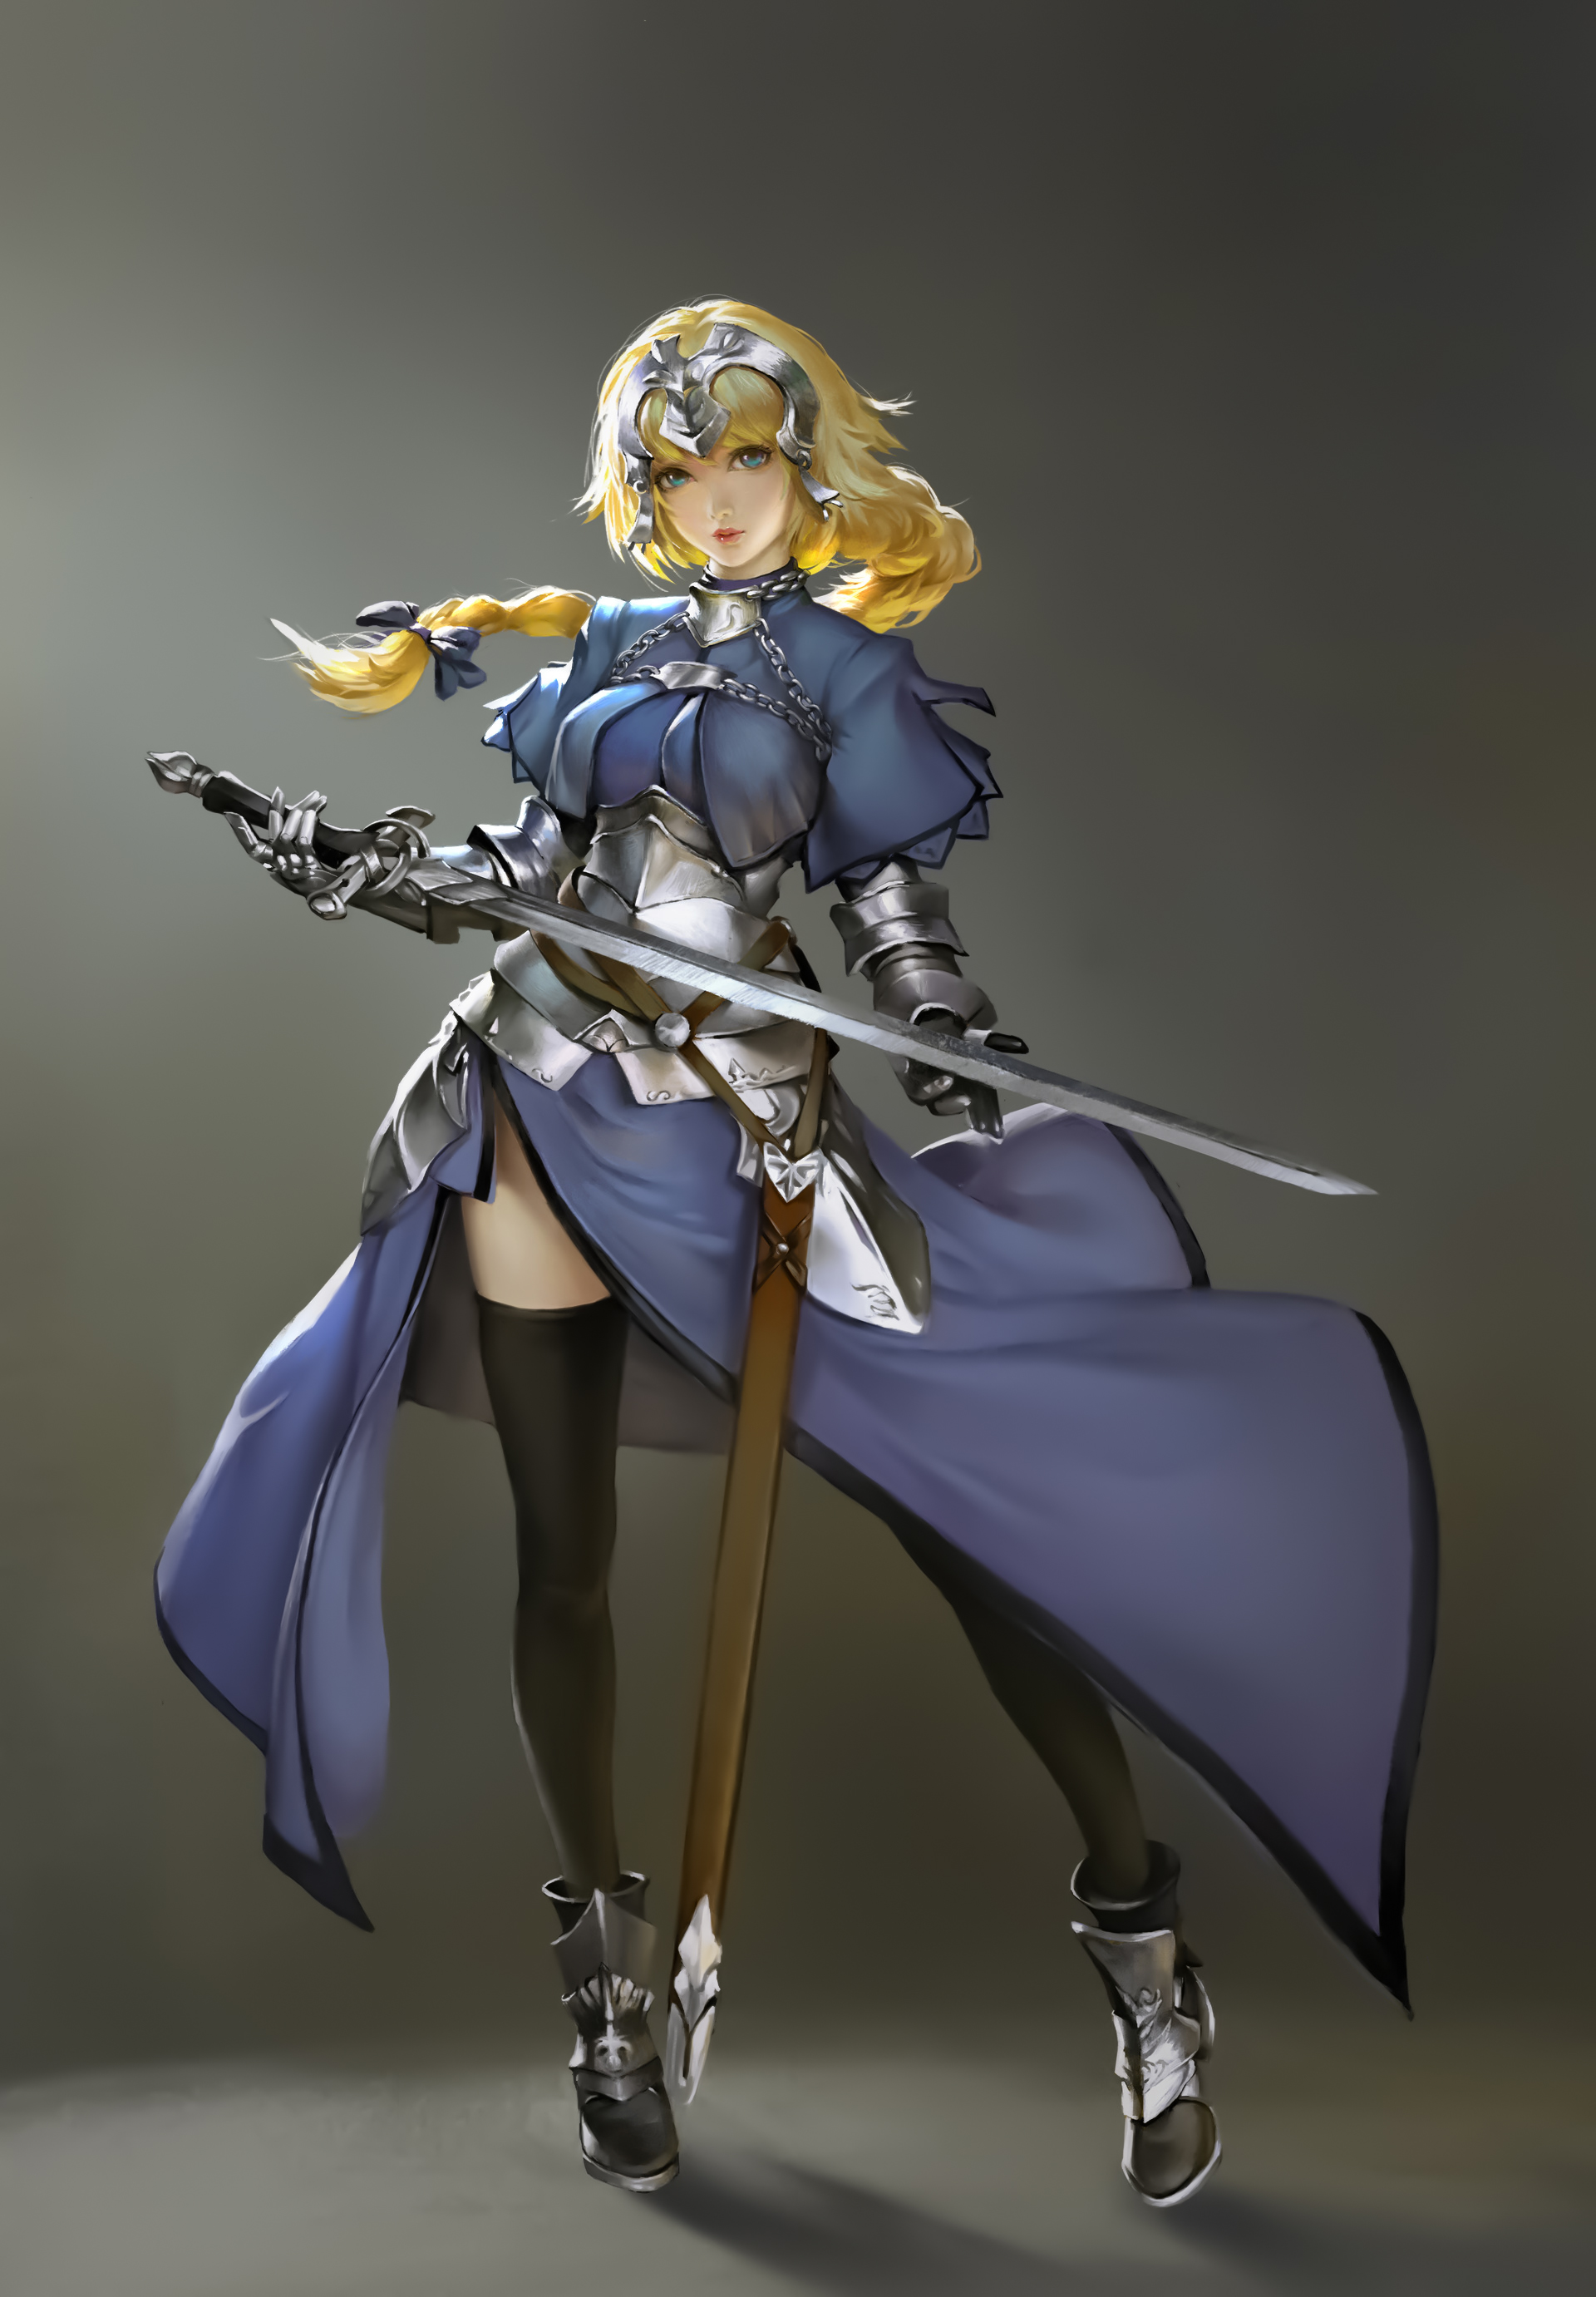 Anime 1920x2763 Ley Bowen drawing women blonde long hair tiaras armor steel dress blue clothing knight weapon sword simple background blue eyes Ruler (Fate/Apocrypha) Jeanne d'Arc (Fate) Fate series Fate/Apocrypha  Fate/Grand Order anime anime girls